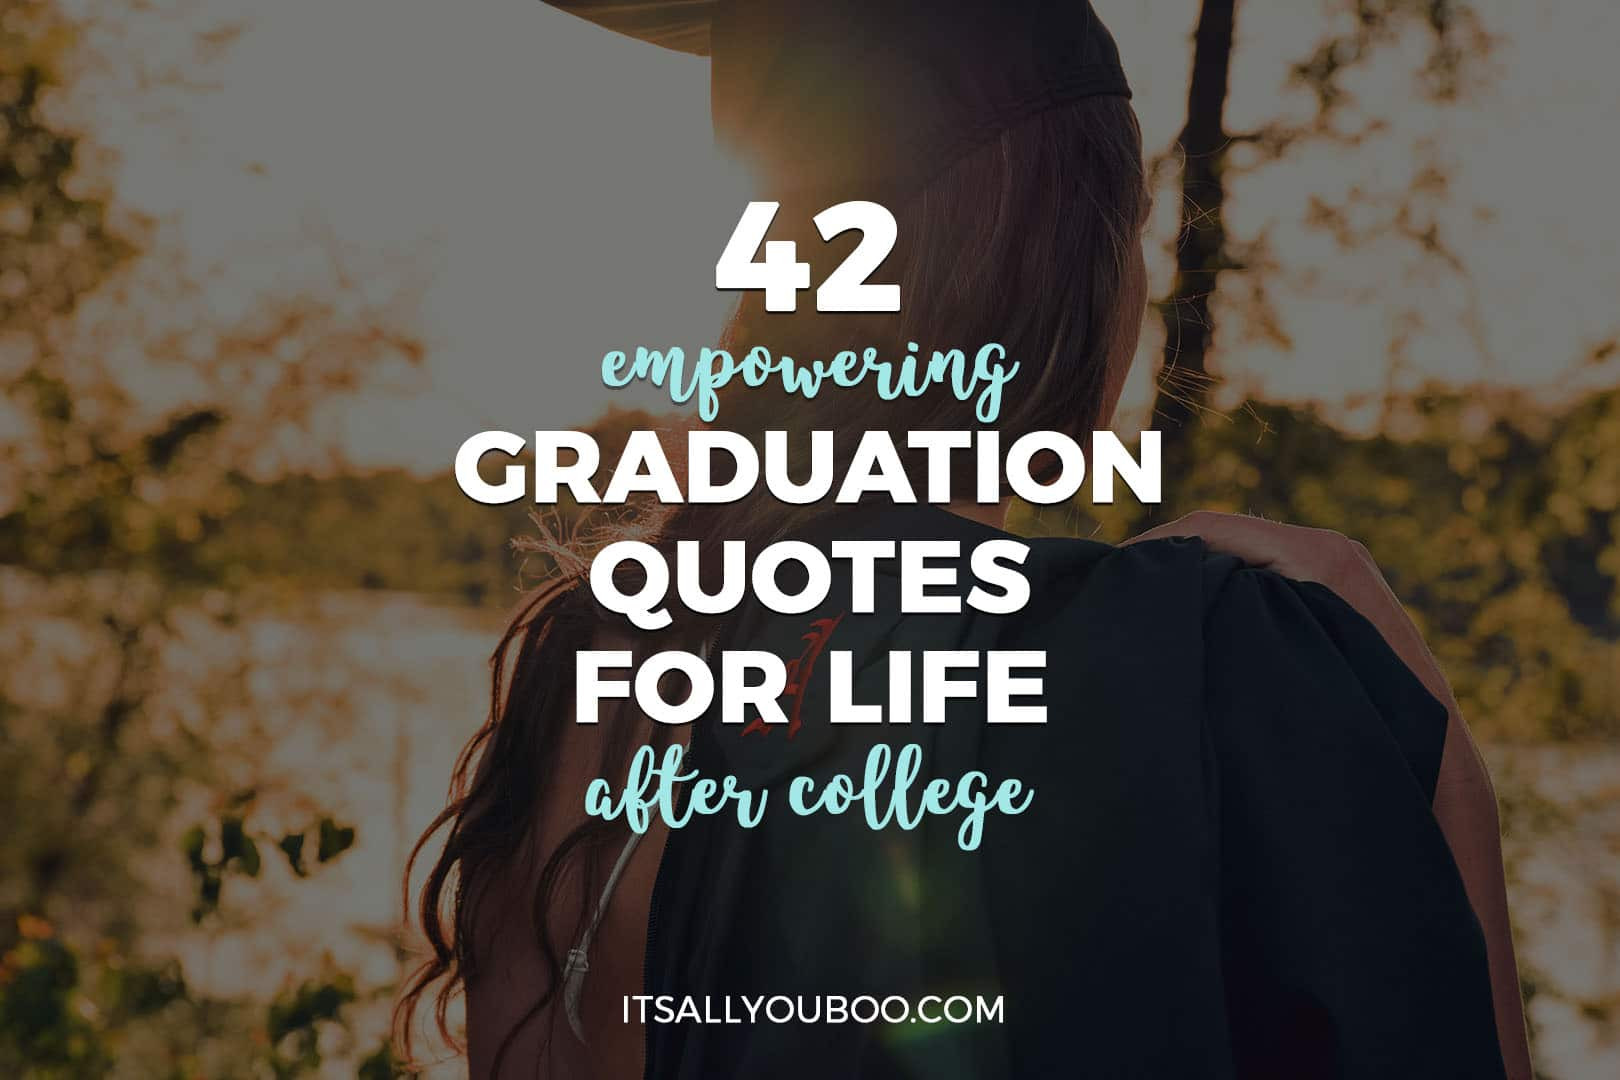 University Graduation Quotes
 42 Empowering Graduation Quotes for Life After College